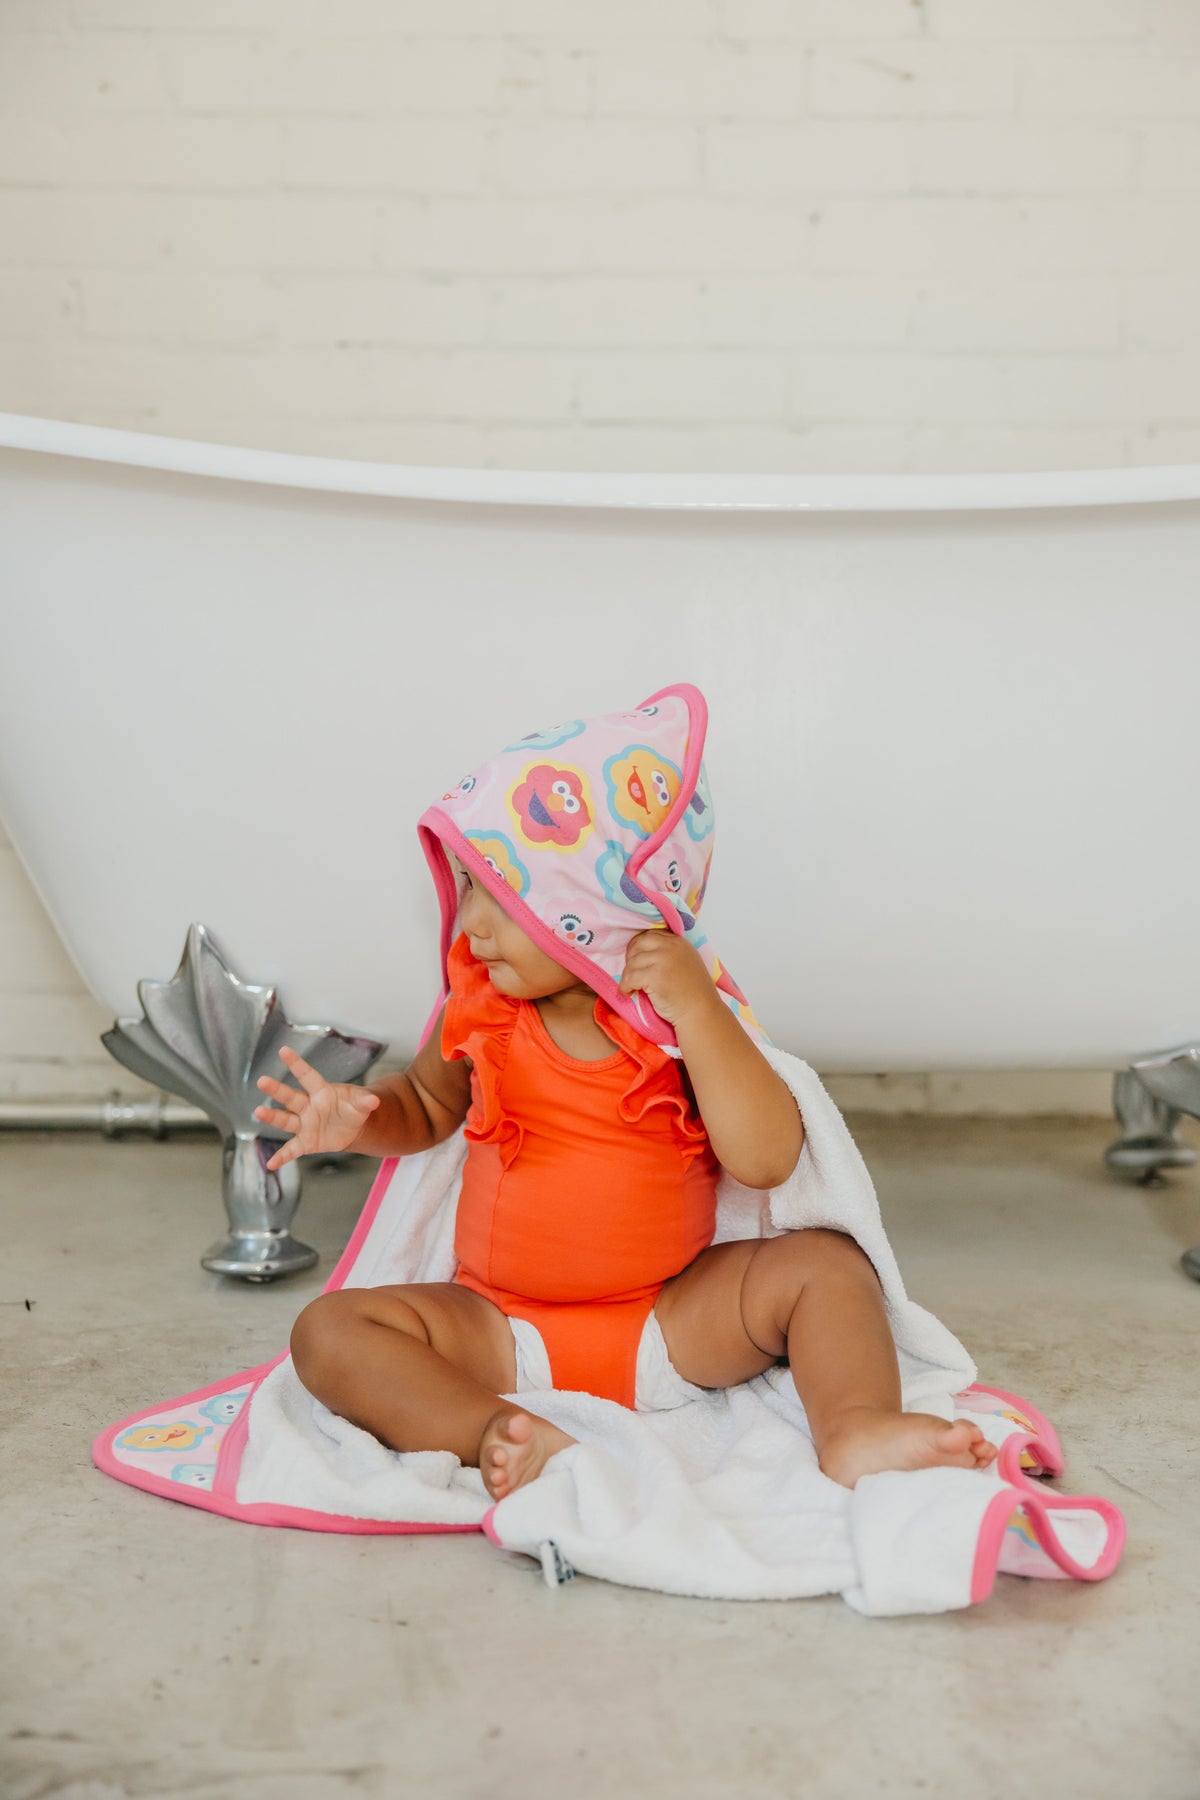 Premium Baby Knit Hooded Towel - Abby and Pals